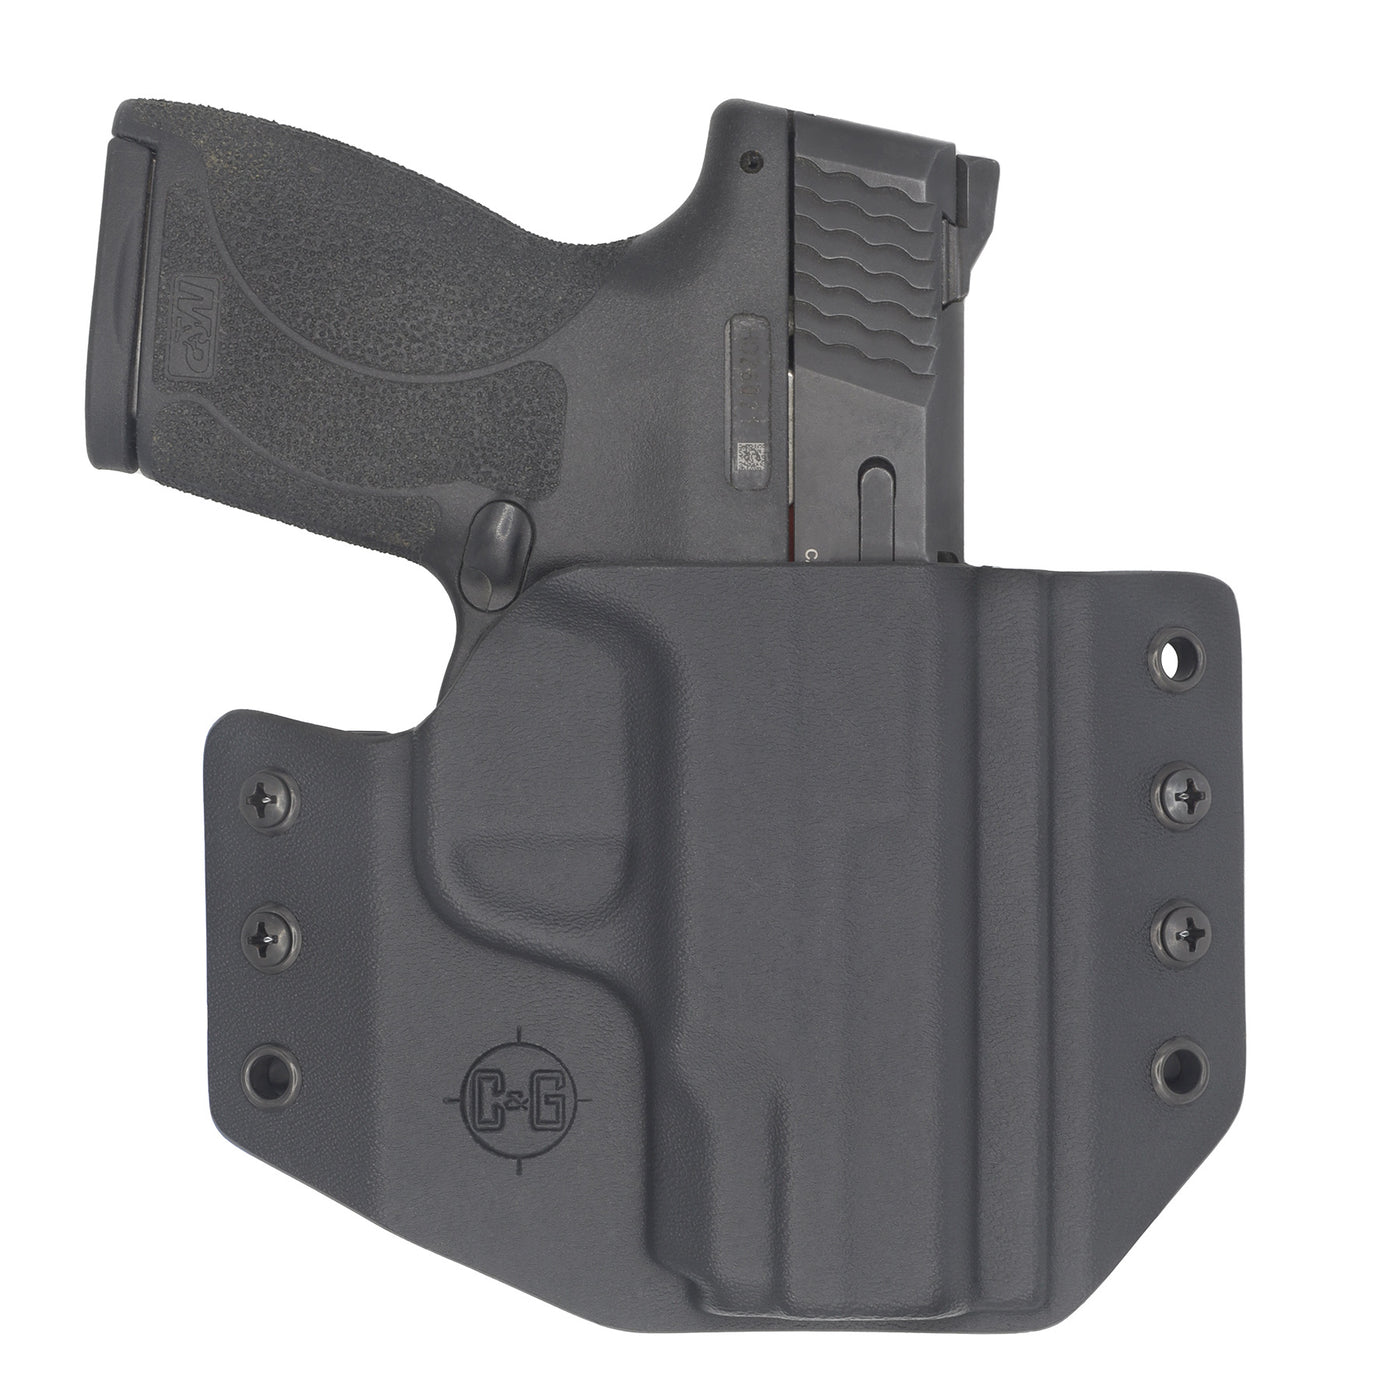 C&G Holsters quick ship Covert OWB kydex holster for Smith & Wesson M&P Shield 45 in black holstered